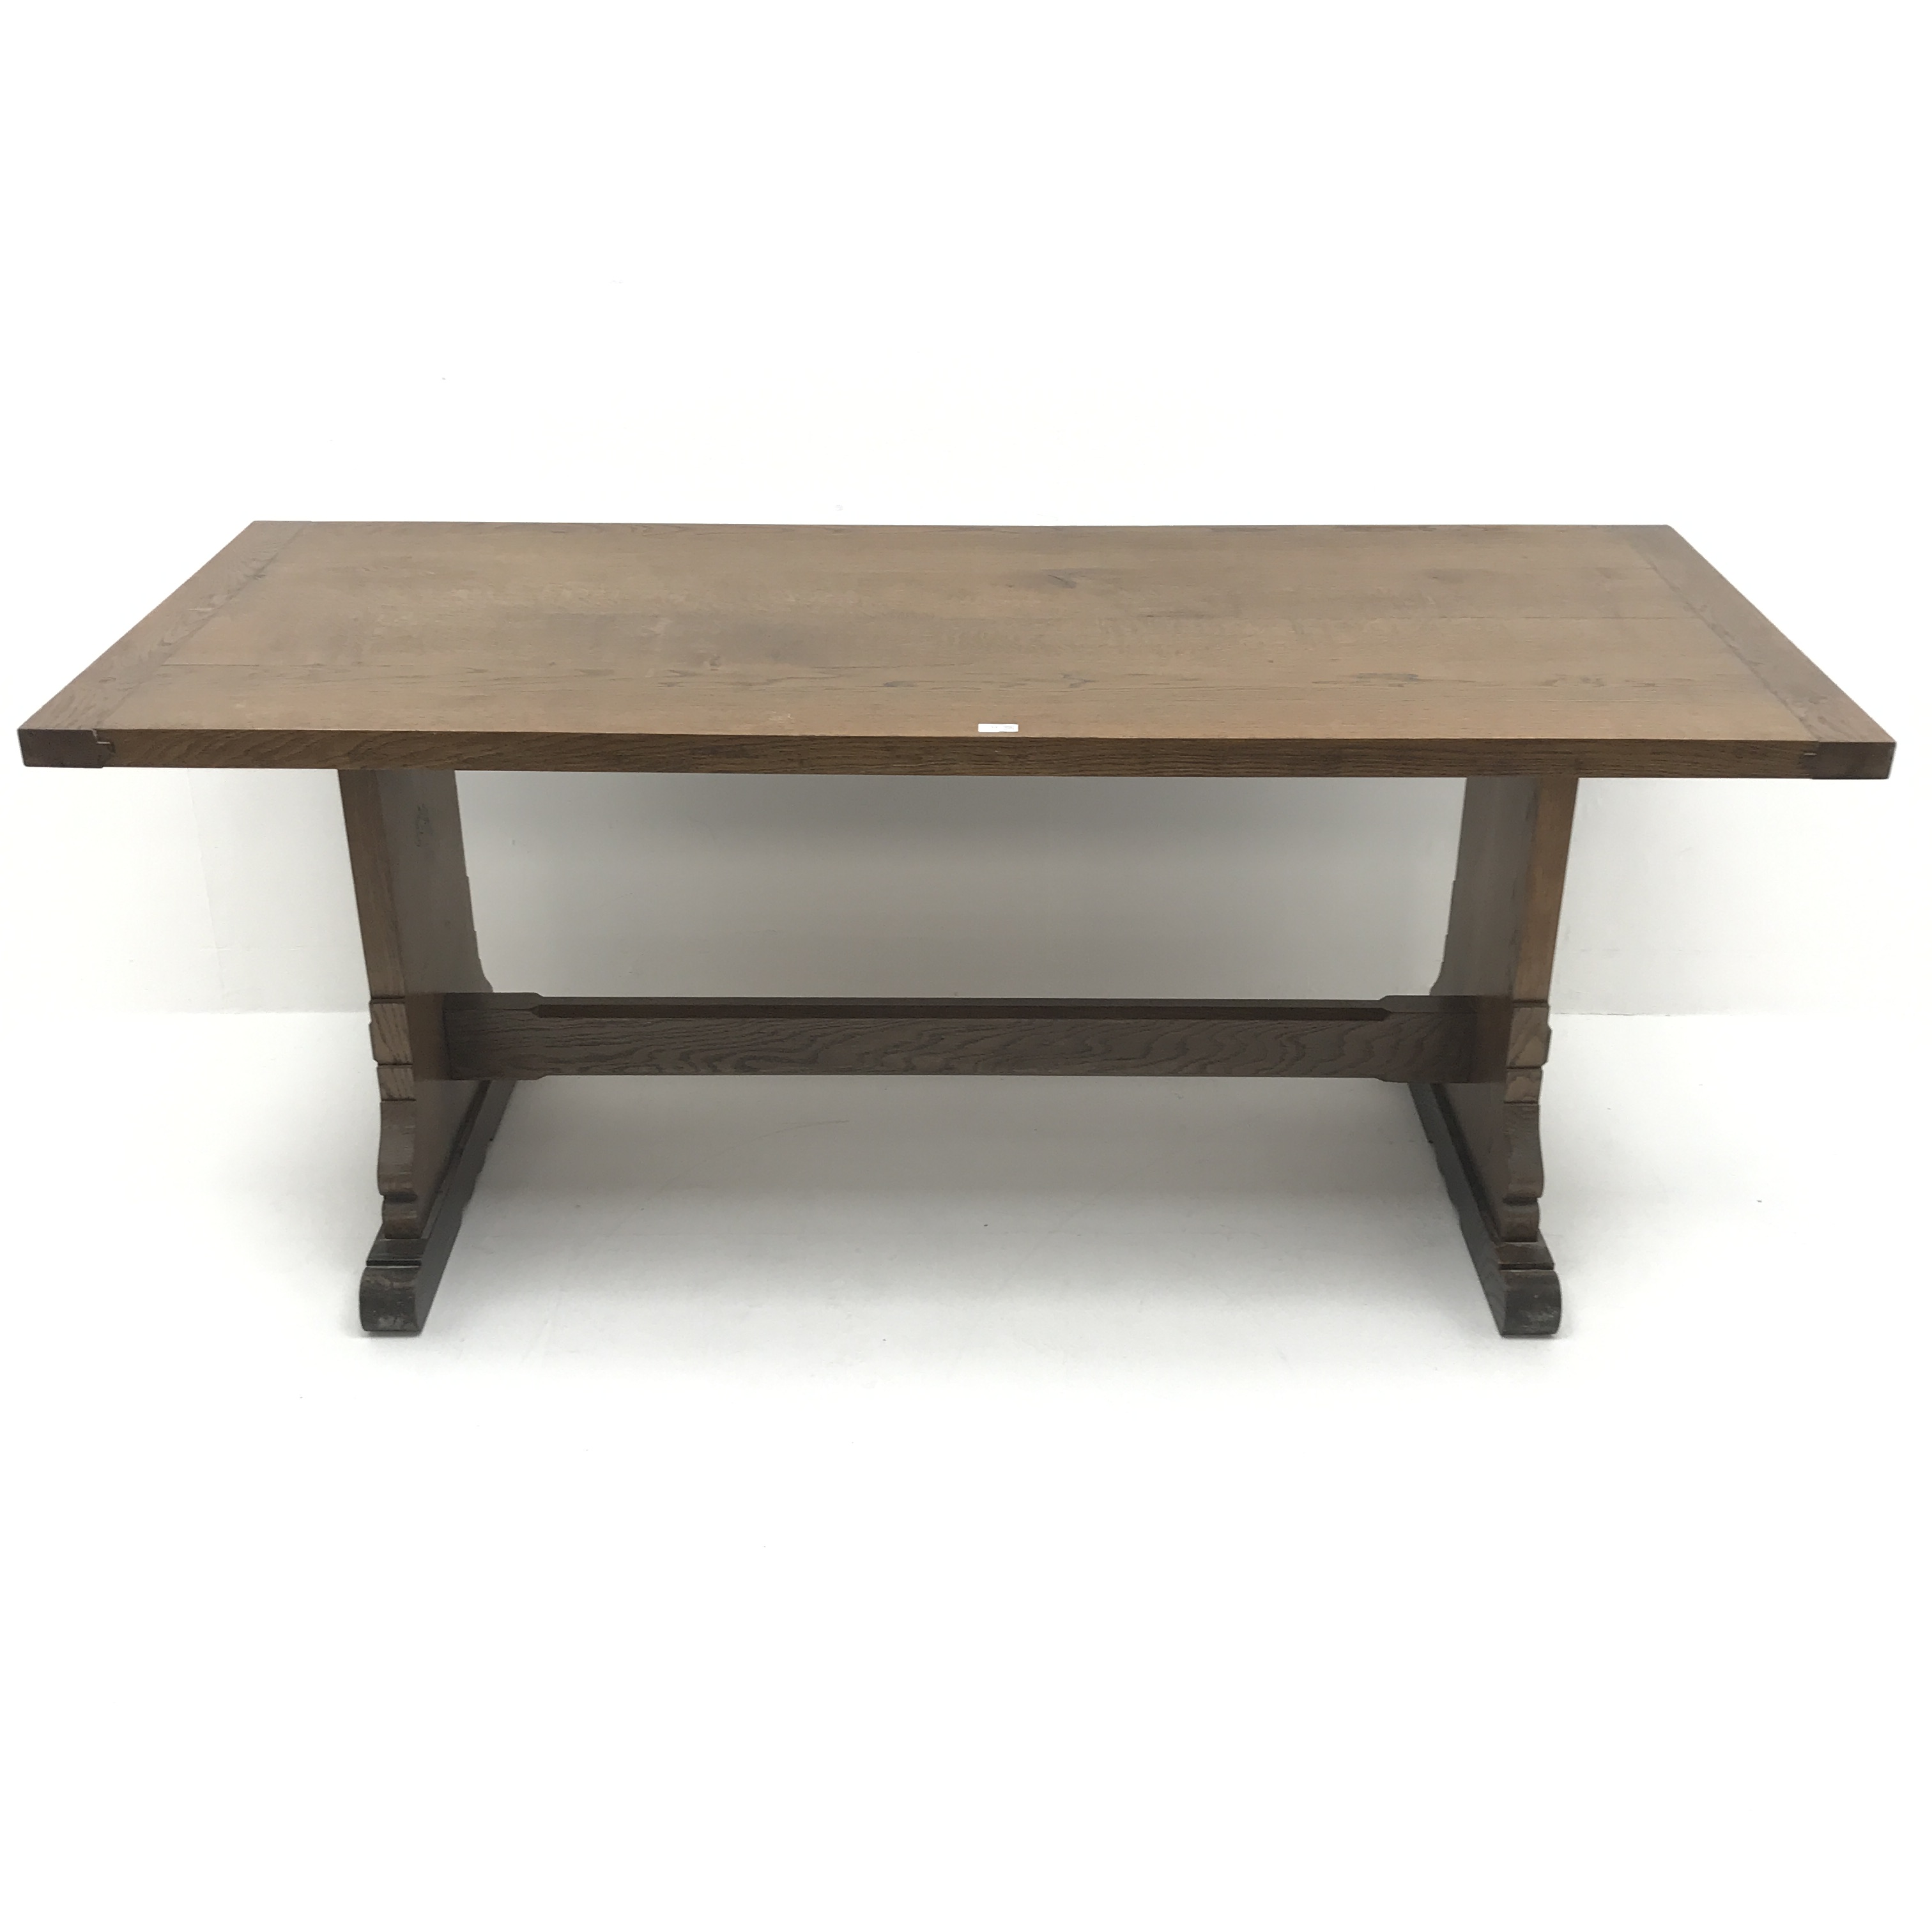 20th century oak refectory table, shaped solid end supports joined by single undertier, sledge feet, - Image 6 of 8